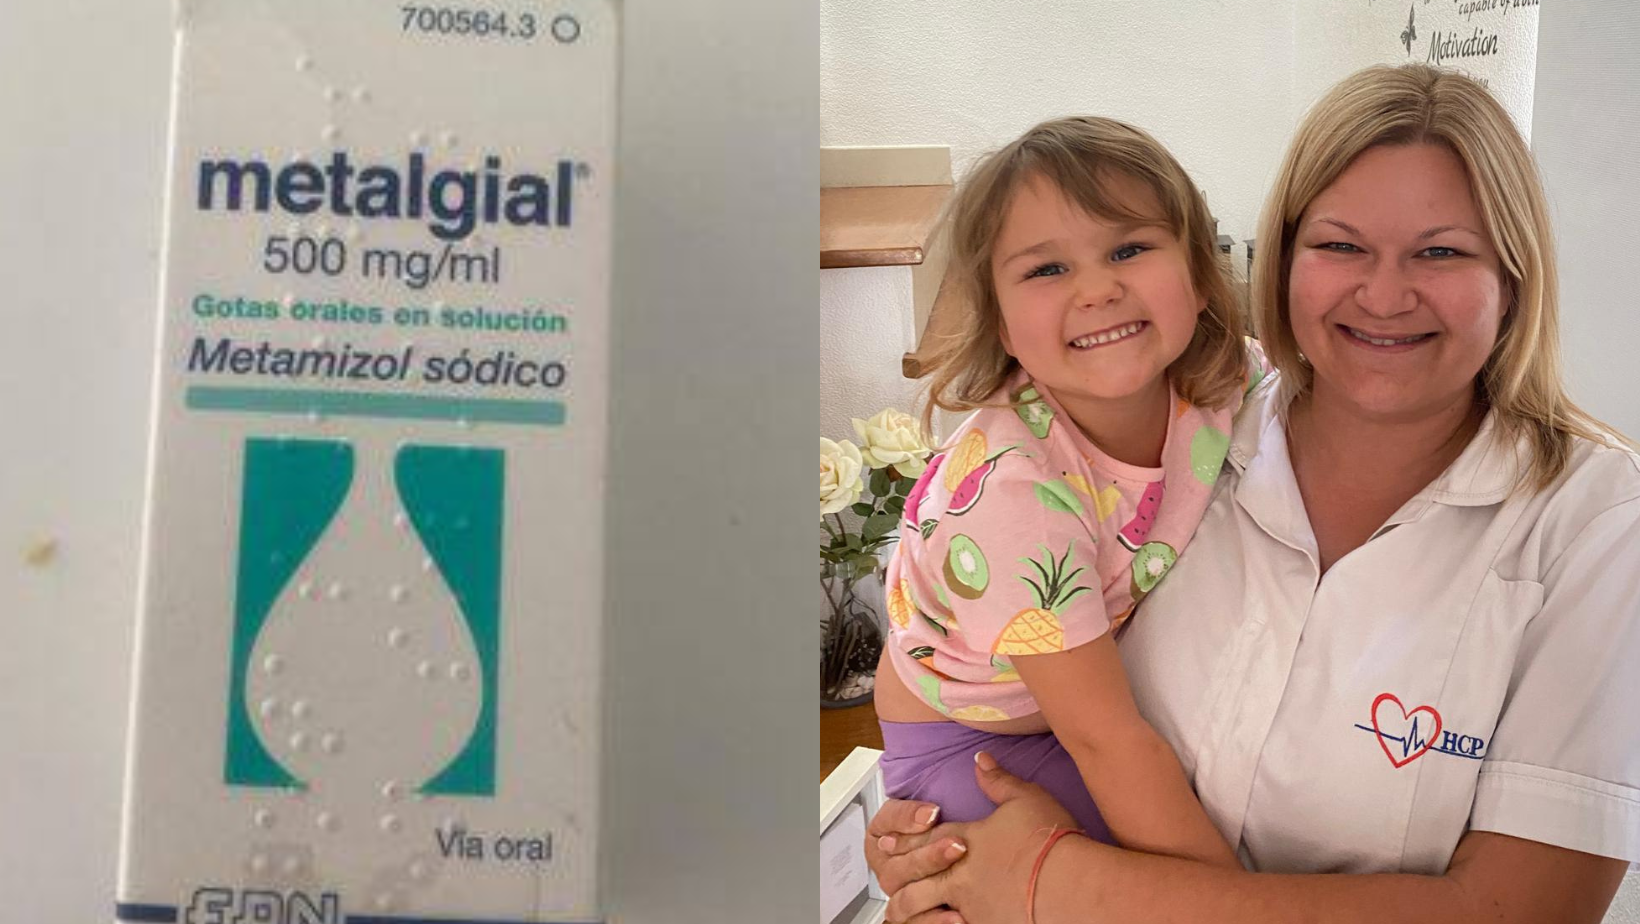 EXCLUSIVE: British expat mother is livid after her toddler is given ‘lethal’ Nolotil painkiller in Spain [Video]